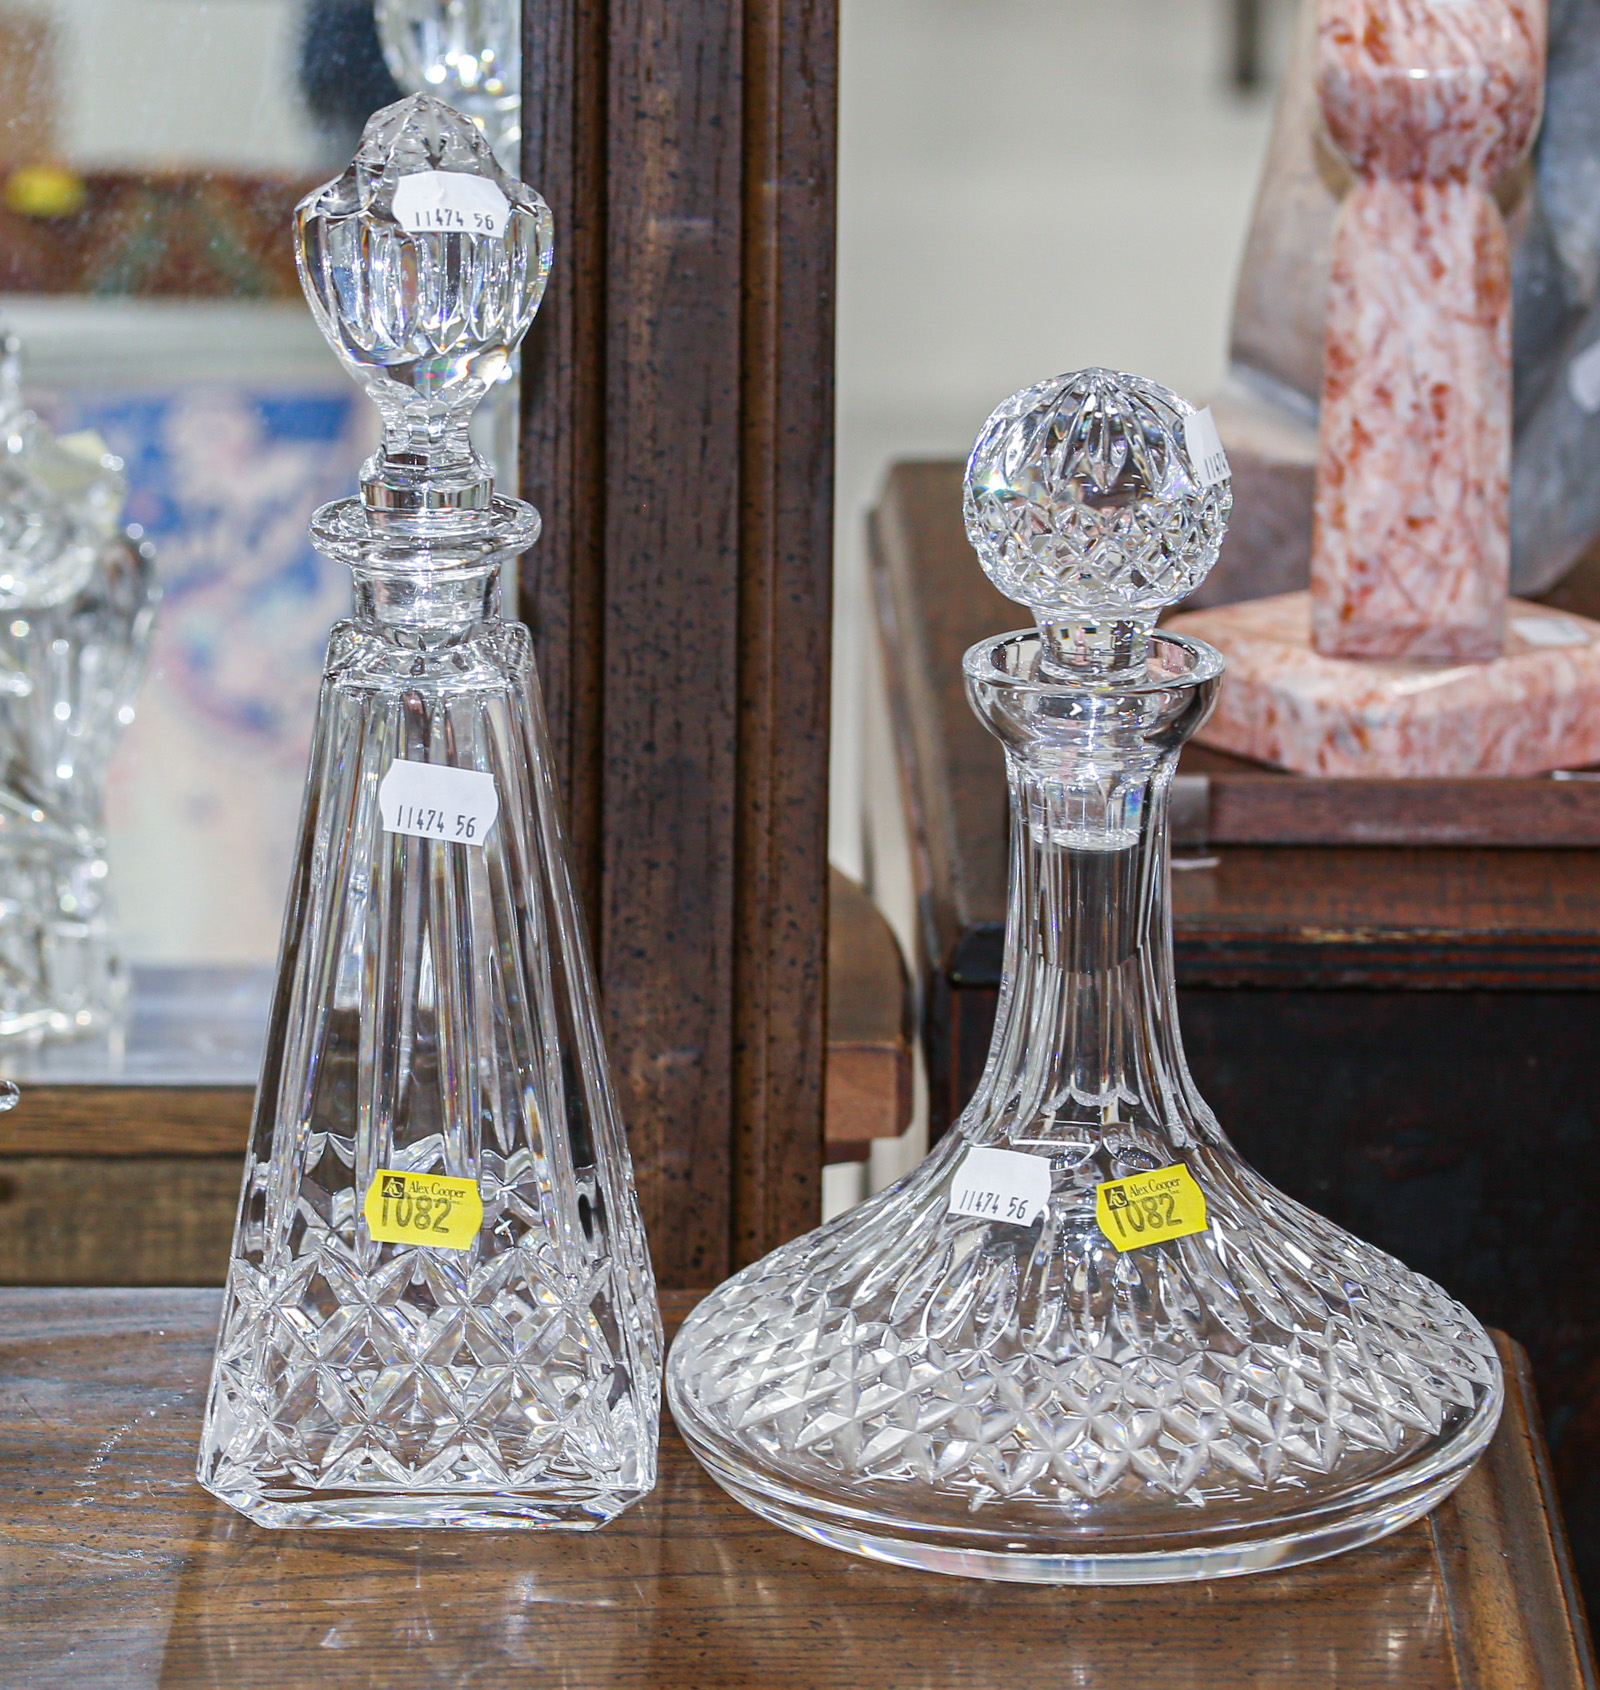 TWO WATERFORD CUT GLASS DECANTERS 36a3d9